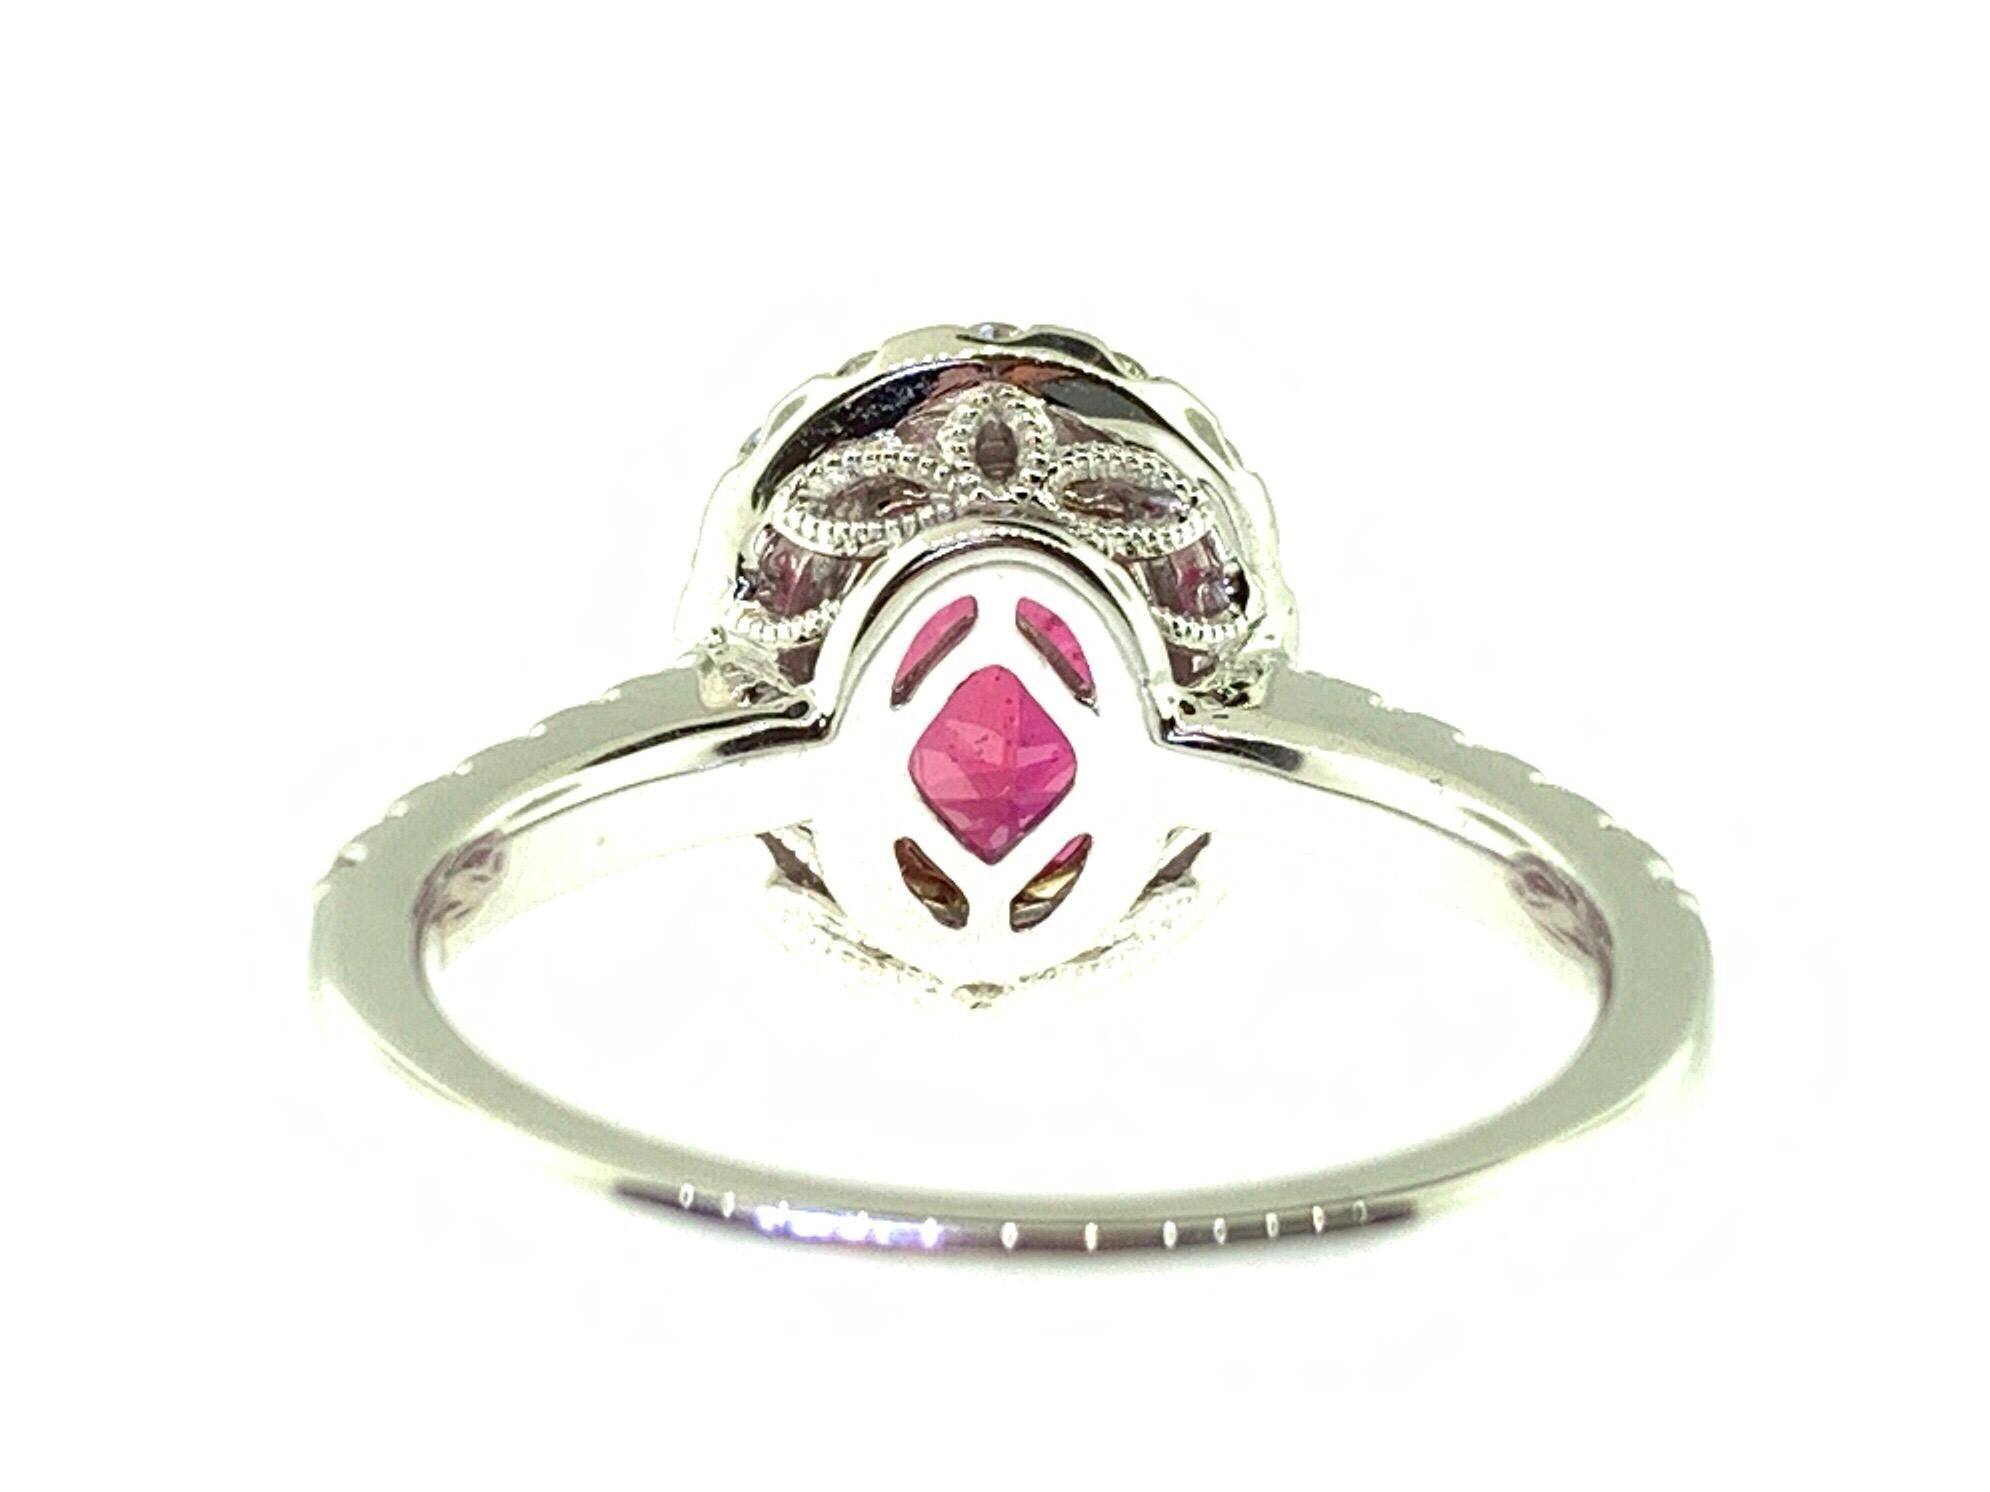 Women's or Men's GIA Certified 2.09 Carat Oval Ruby and Diamond Cocktail Ring